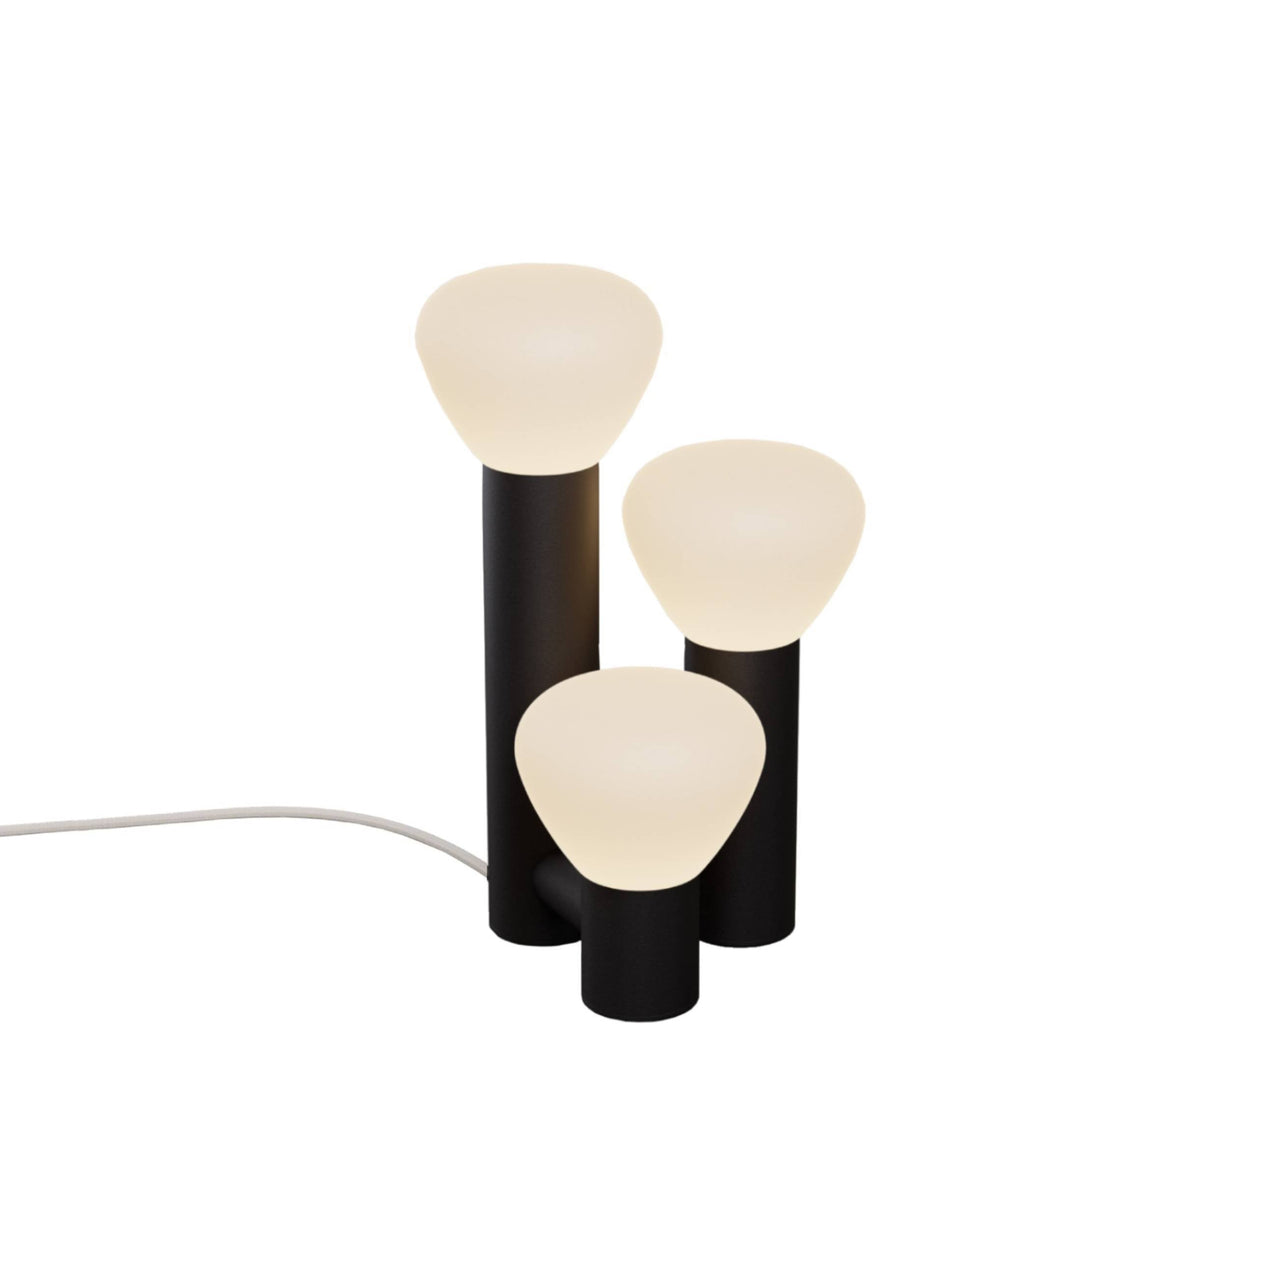 Parc 06 Table Lamp: Footswitch +  Black + Beige